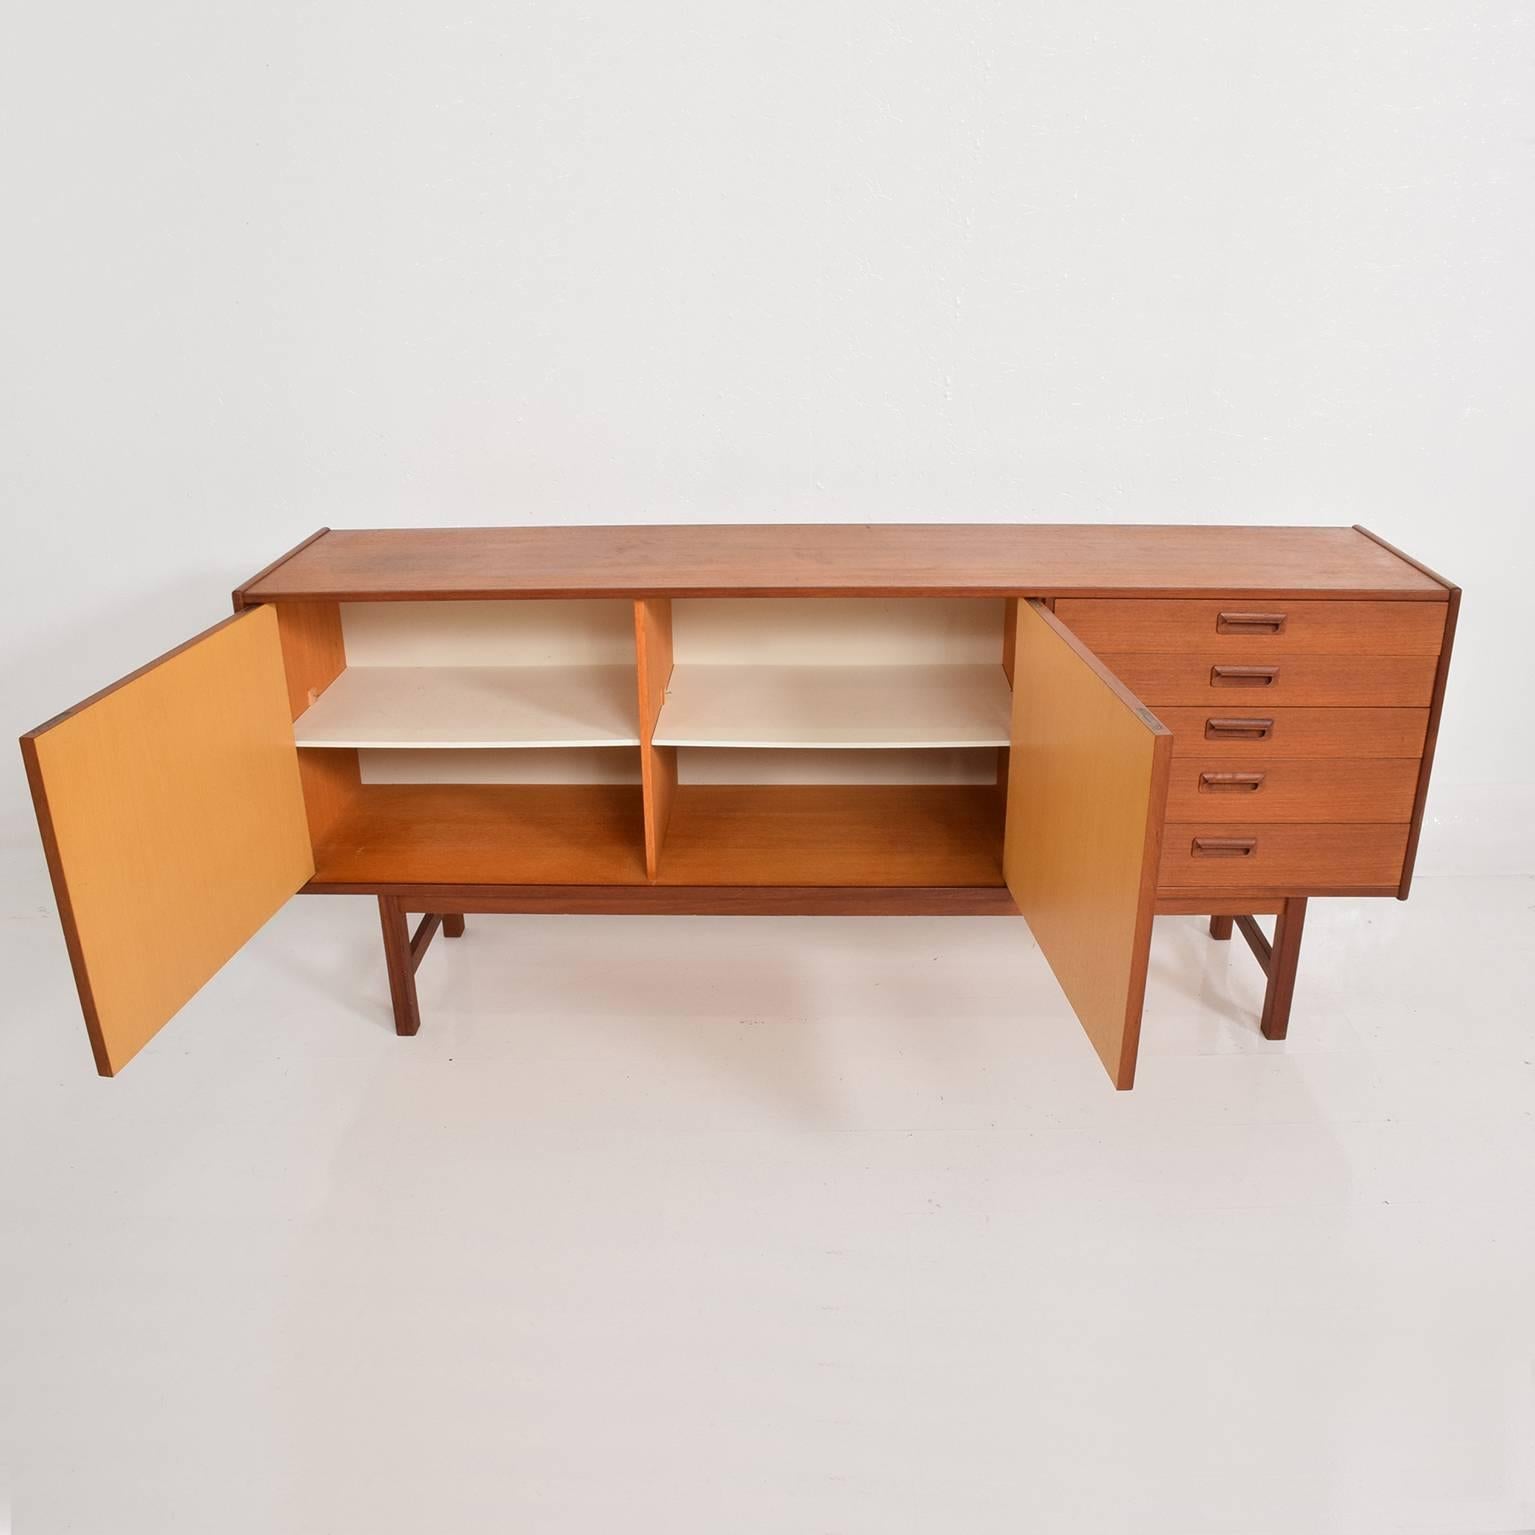 Midcentury Modern Classic Teak Credenza with two open storage areas and pull-out drawers on the left side. 
Mounted on solid teak legs.
No apparent label Piece is Unmarked. Attributed in style and design to Arne Vodder for Sibast Modern.
Denmark,